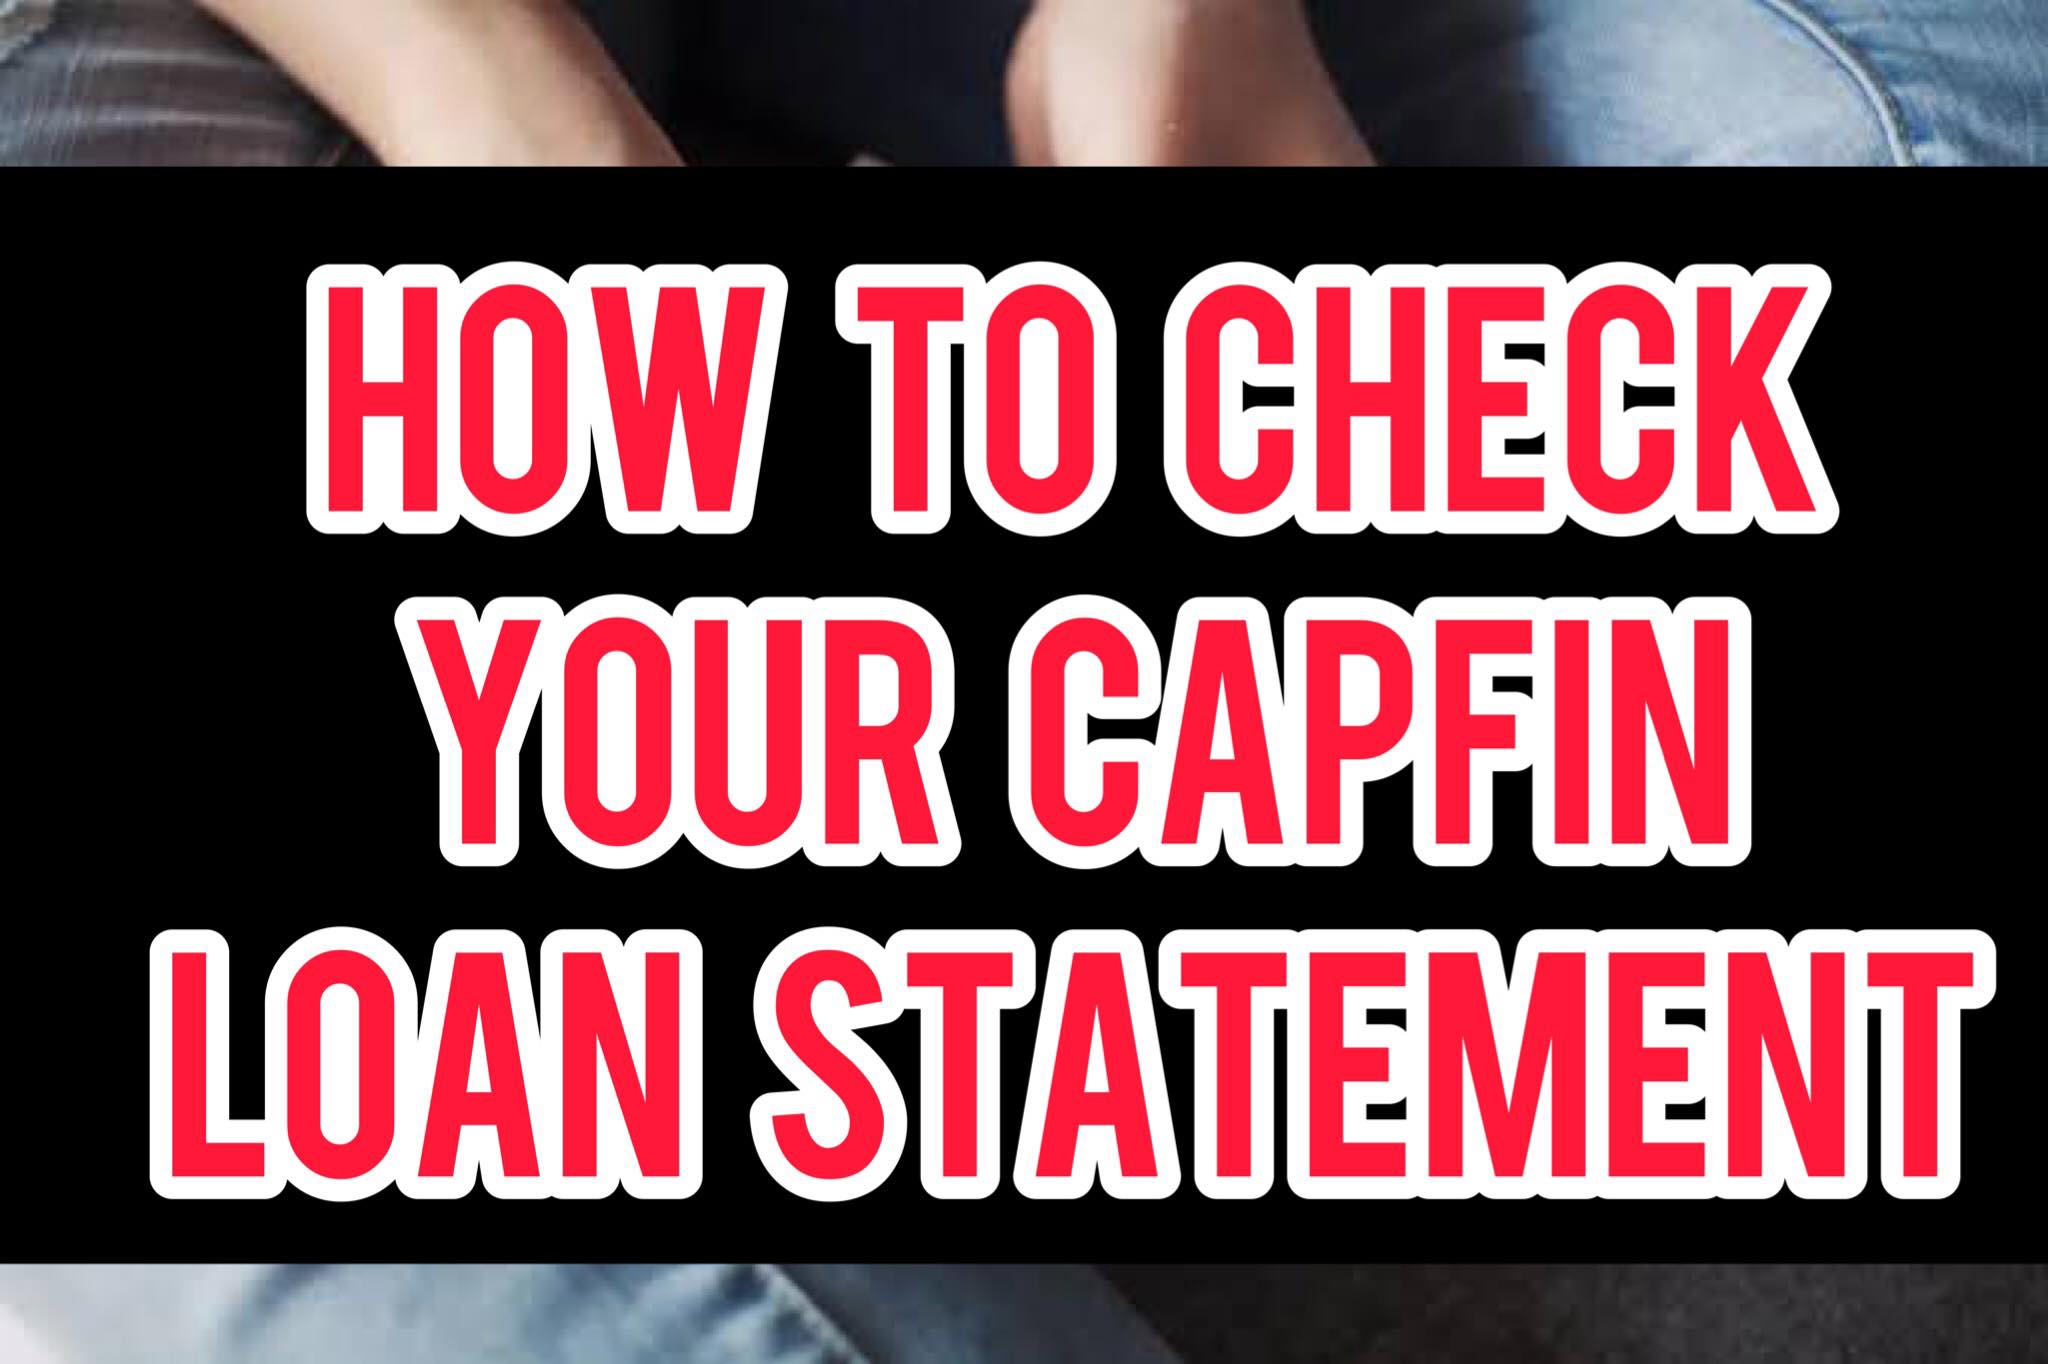 How To Check Capfin Loan Statement